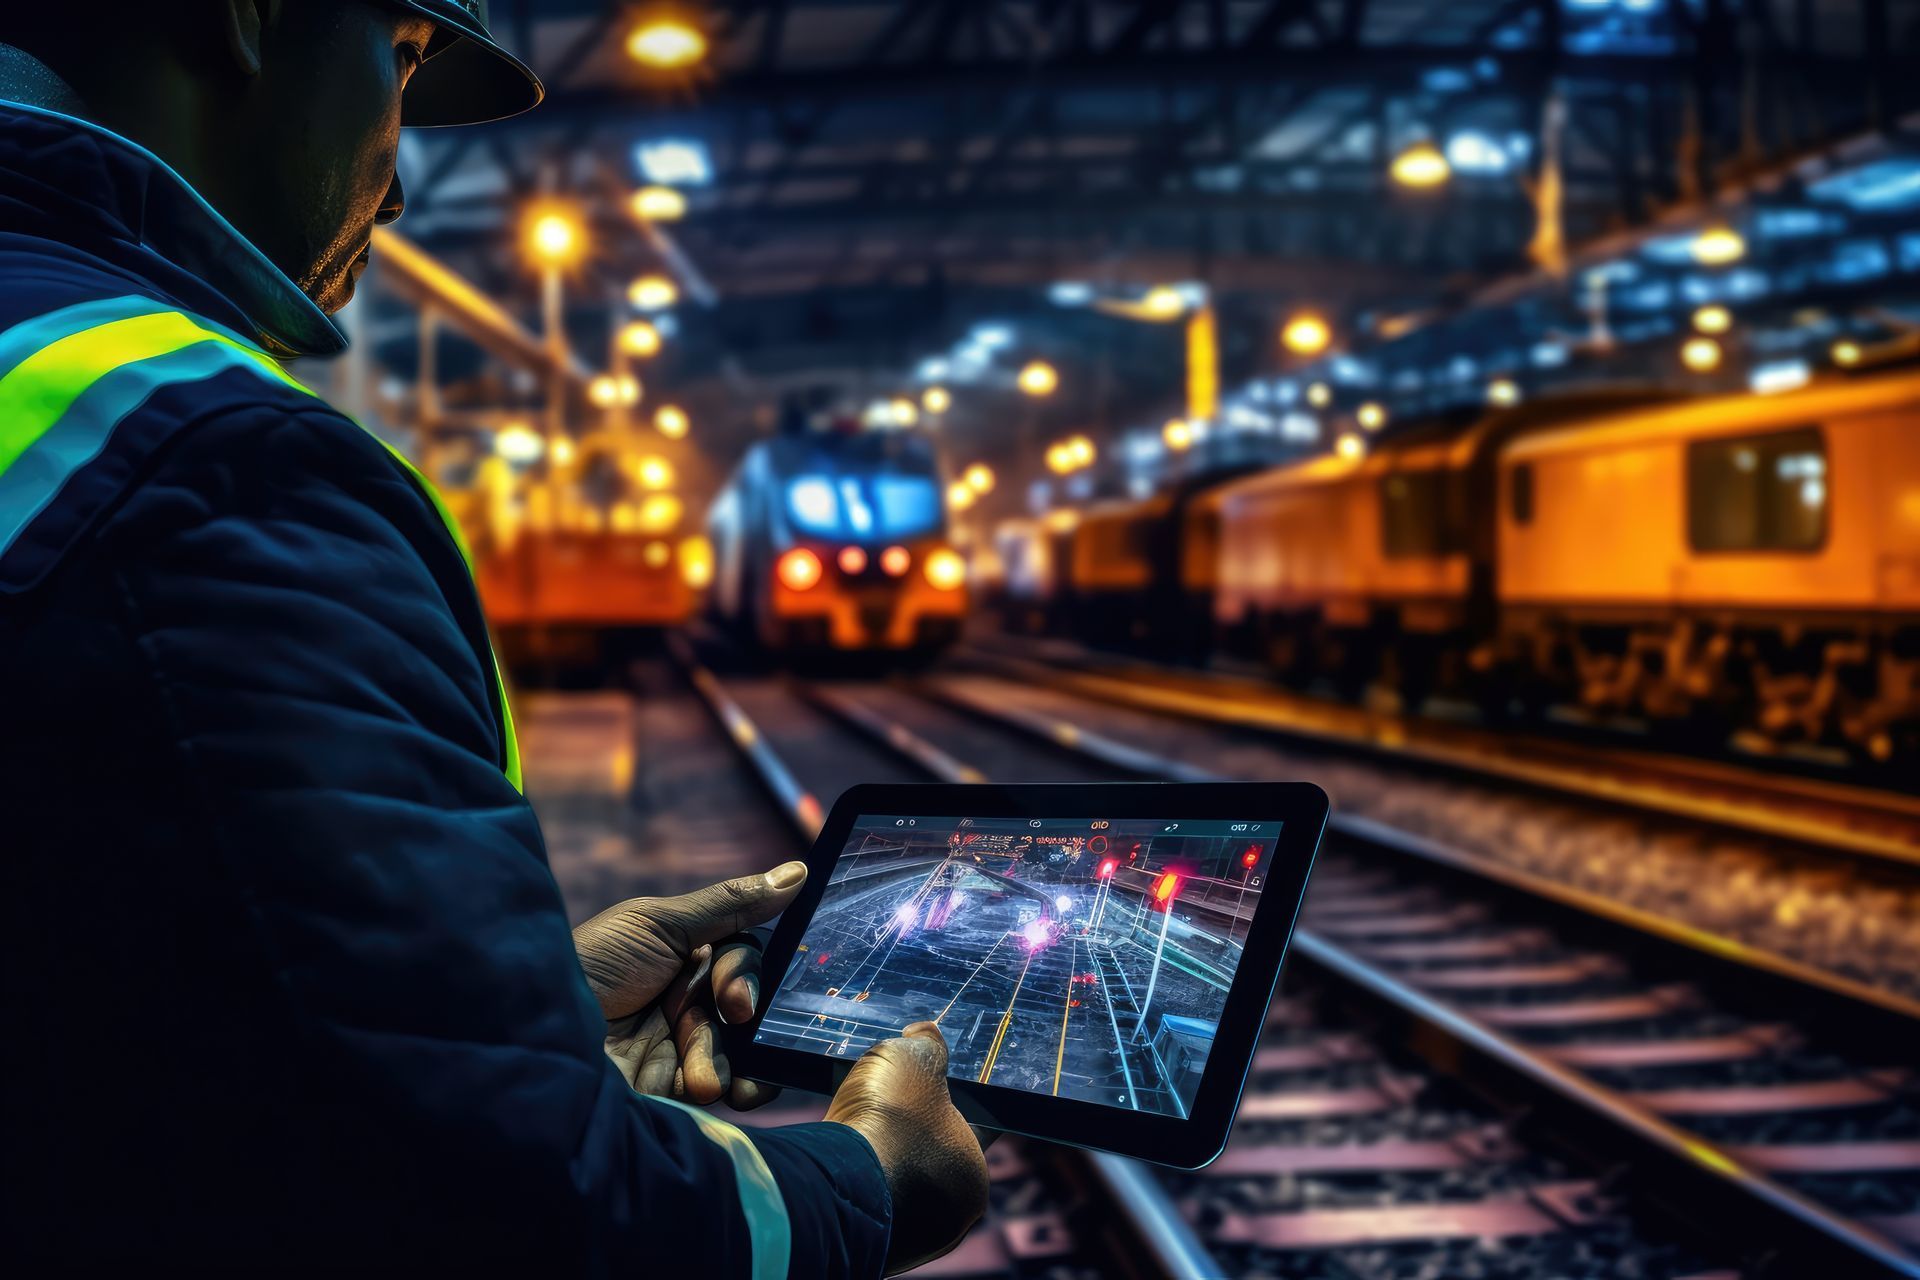 a man is looking at a tablet while standing on train tracks .